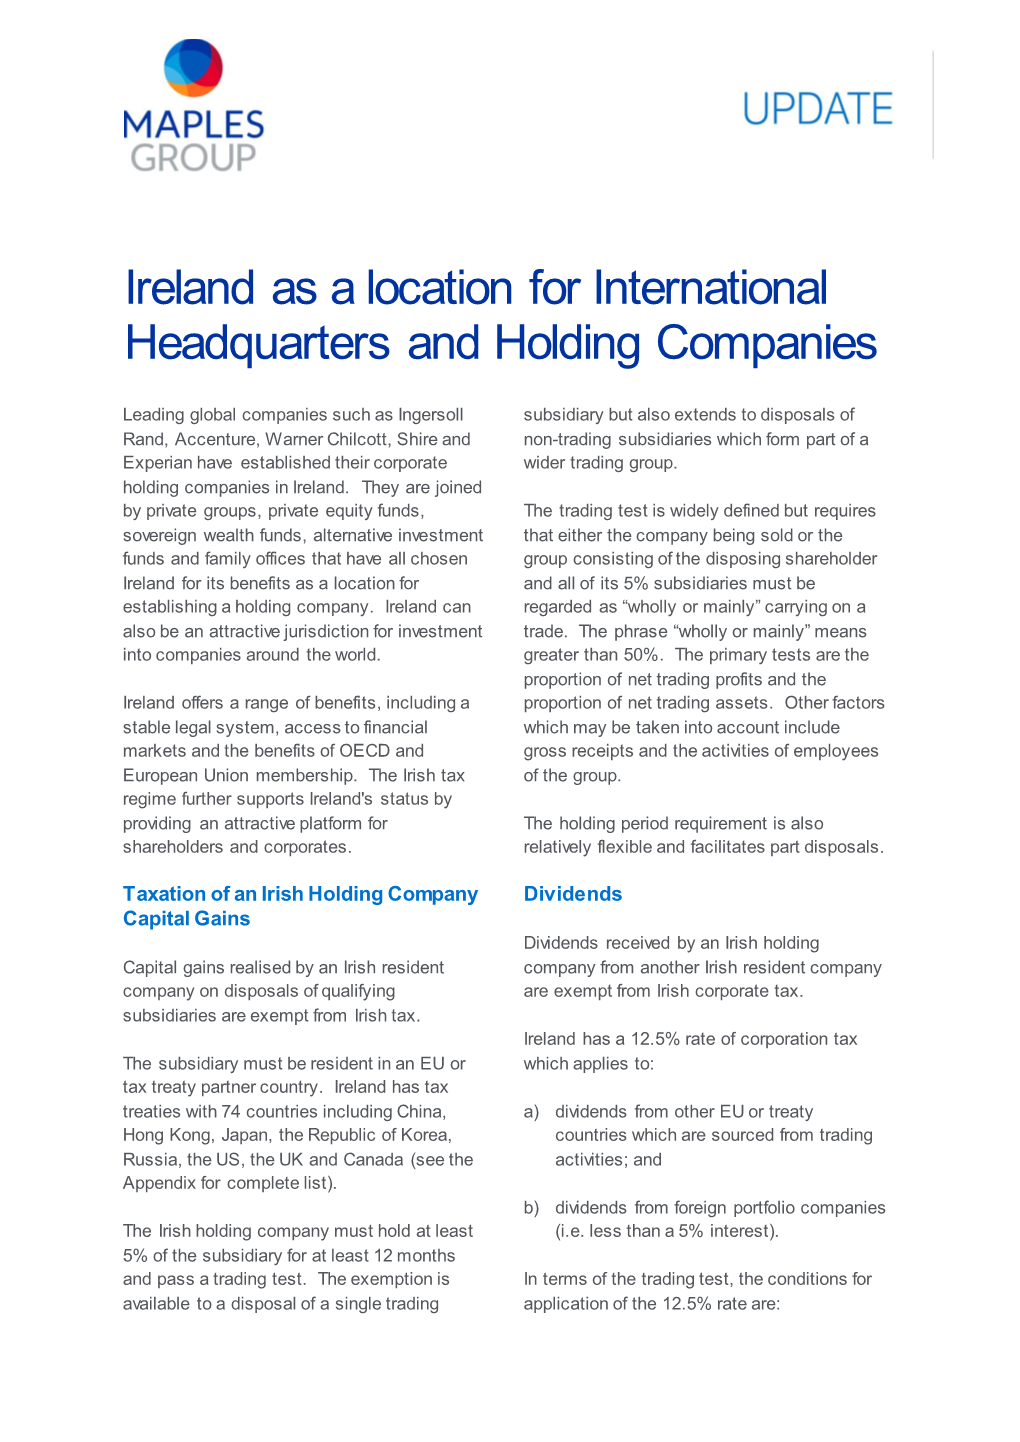 Ireland As a Location for International Headquarters and Holding Companies